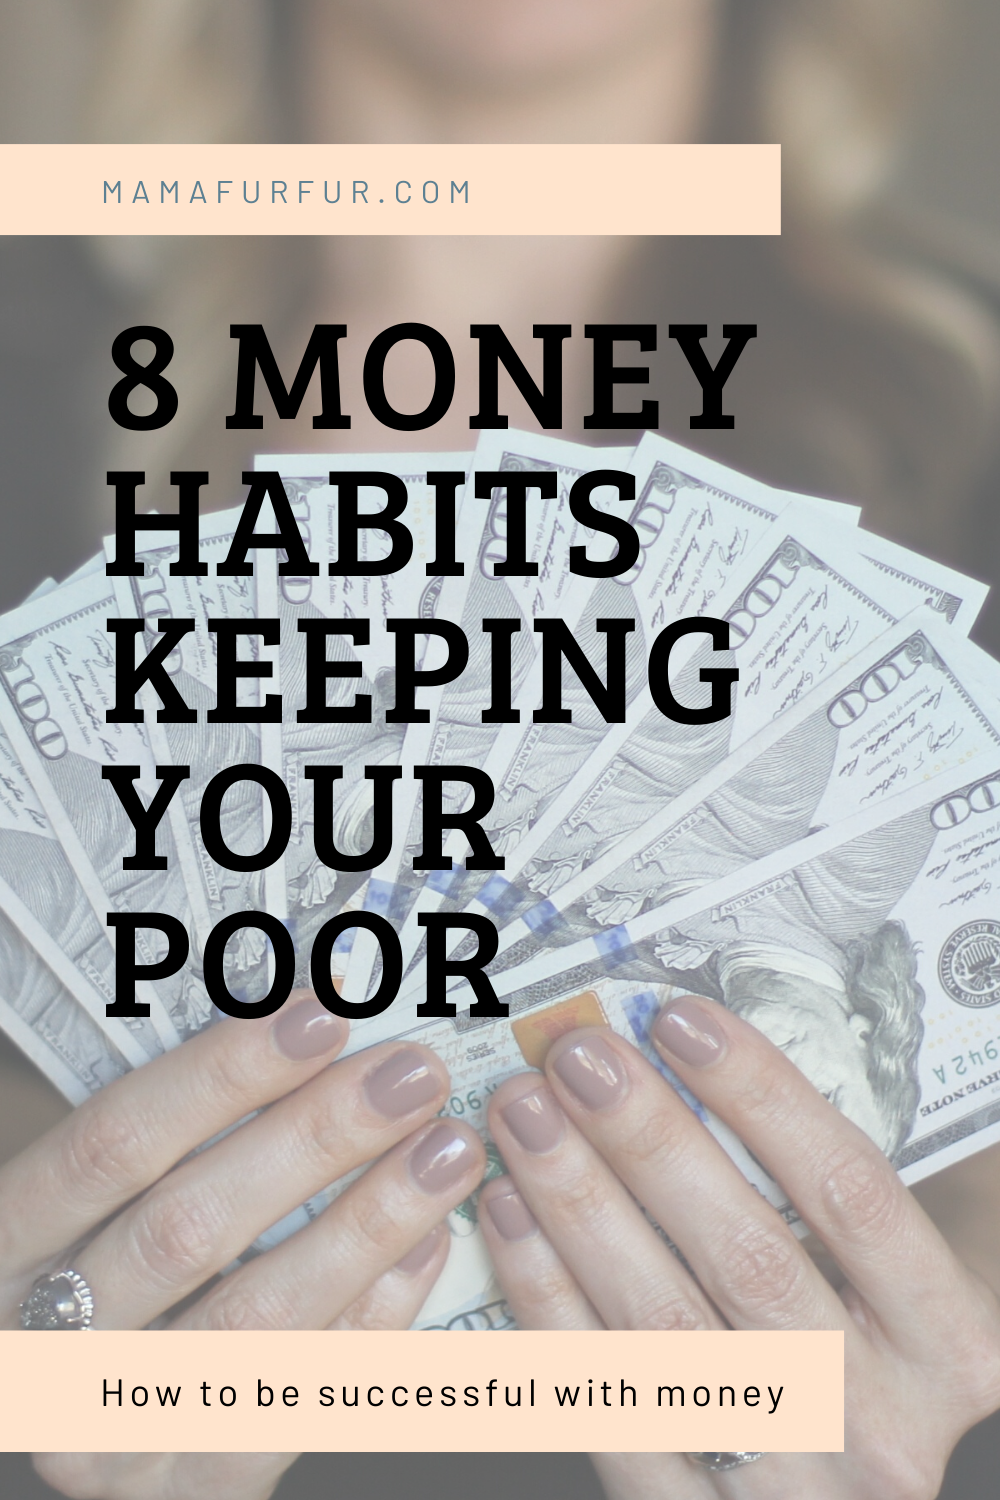 MONEY HABITS THAT ARE KEEPING YOU POOR - Bad Money habits to avoid in 2020